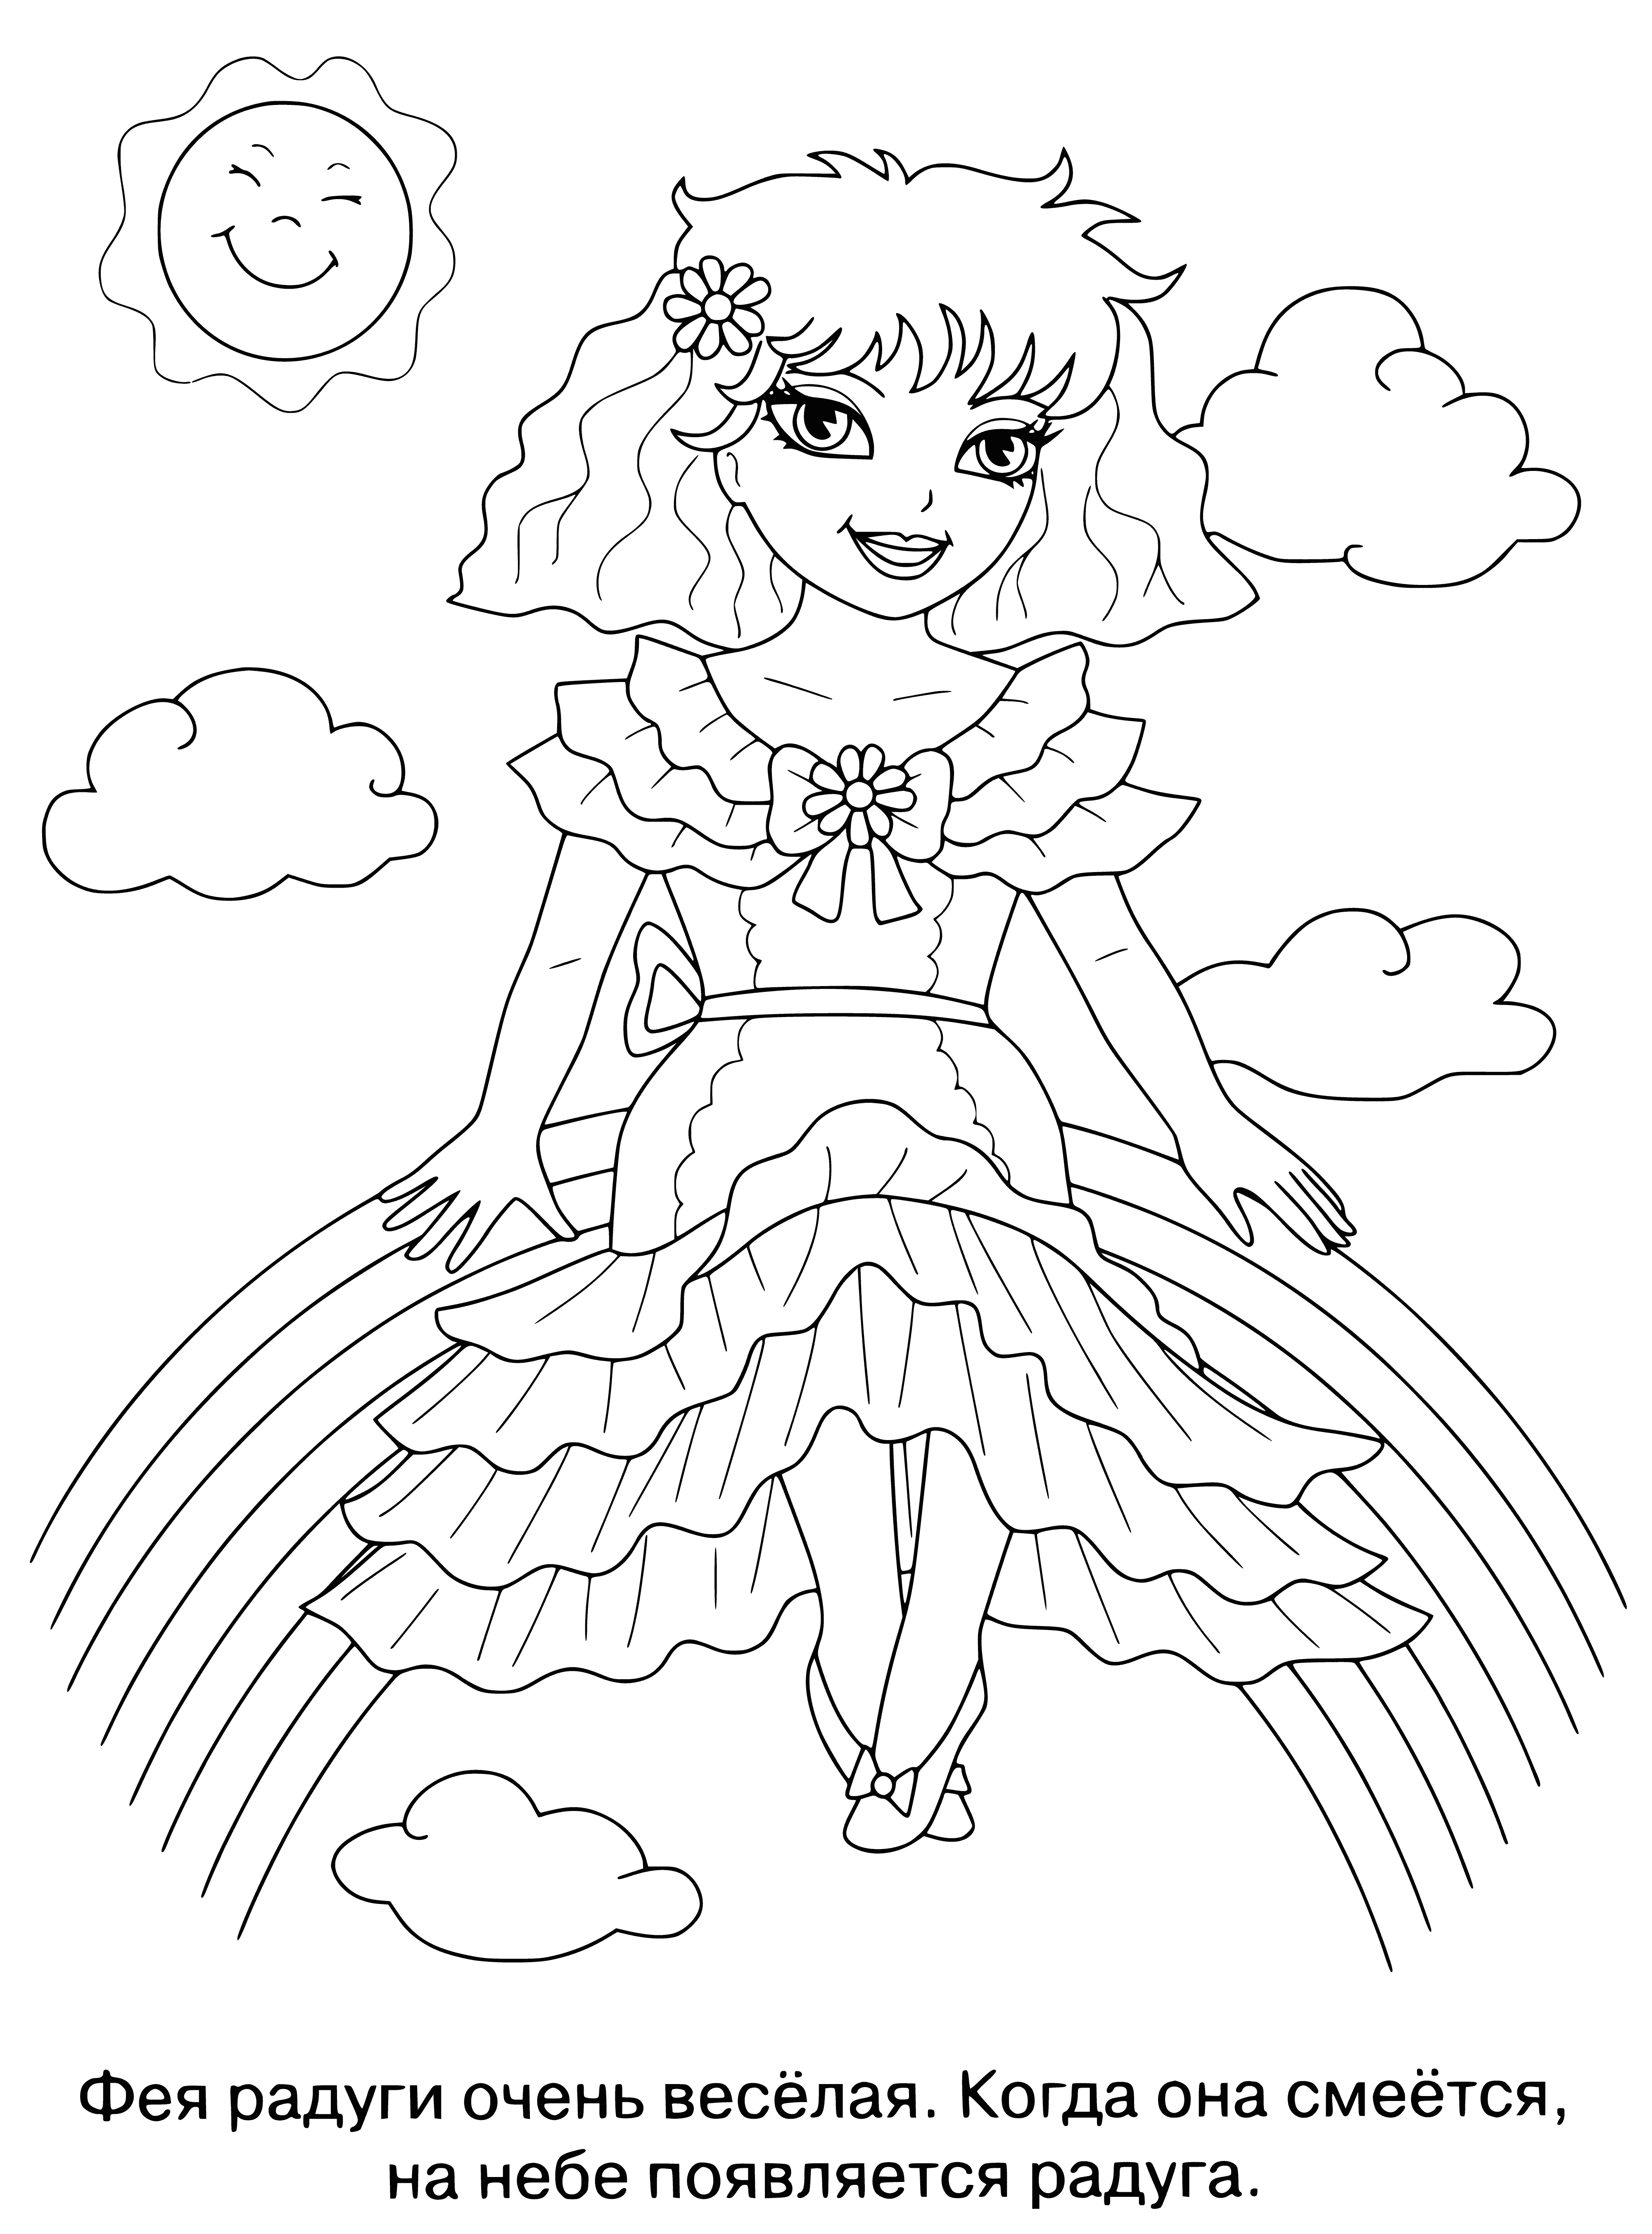 Fairy rainbow coloring page